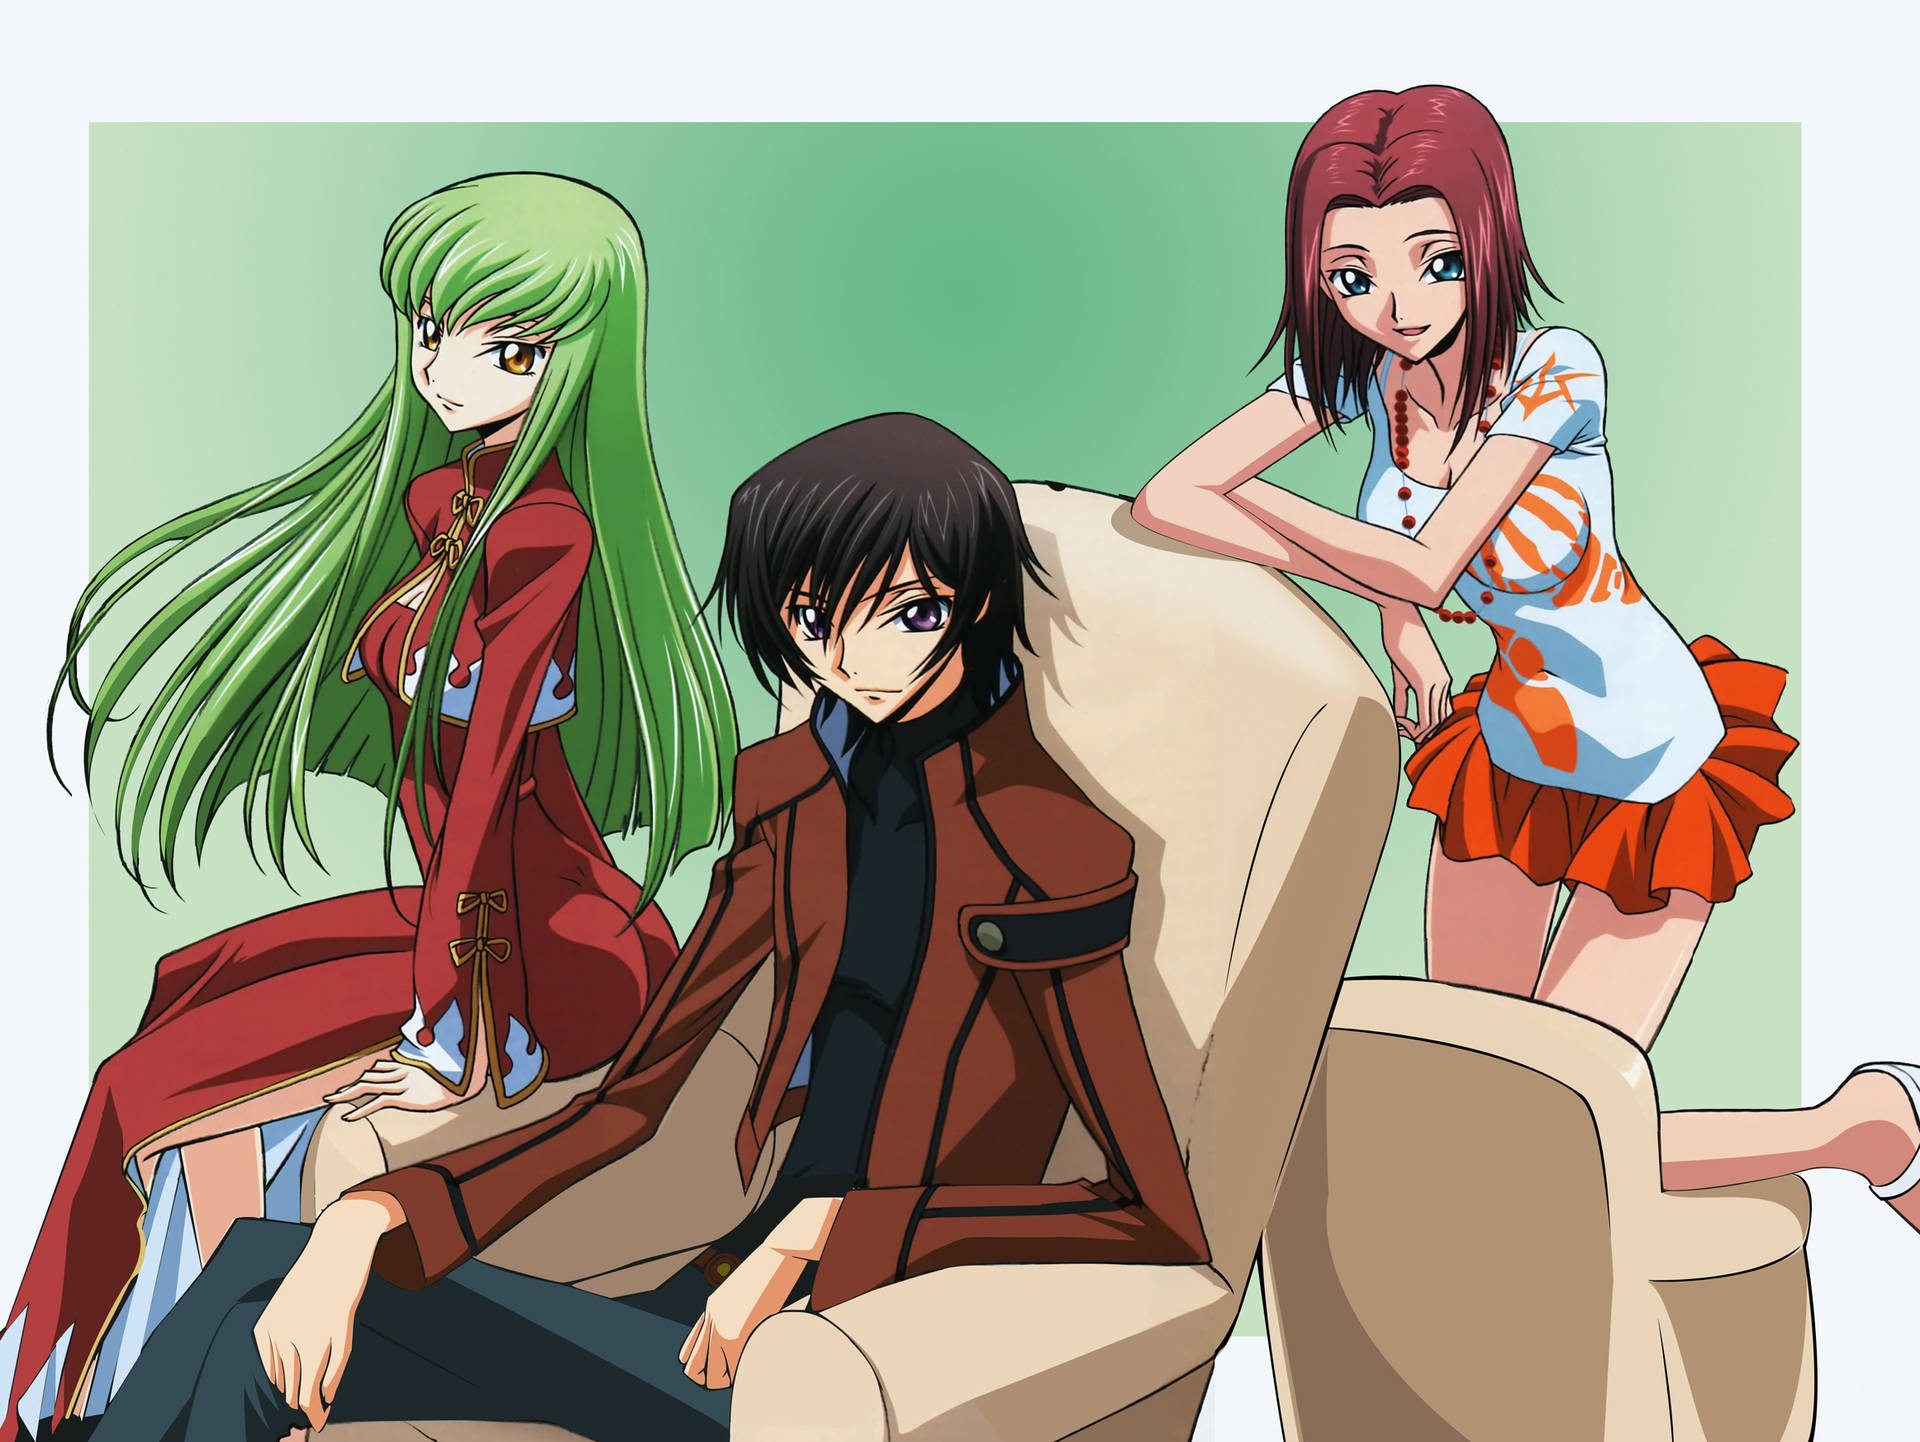 (c.c. Together With Lelouch Lamperouge And Kallen On Your Computer Screen As Wallpaper.) Wallpaper